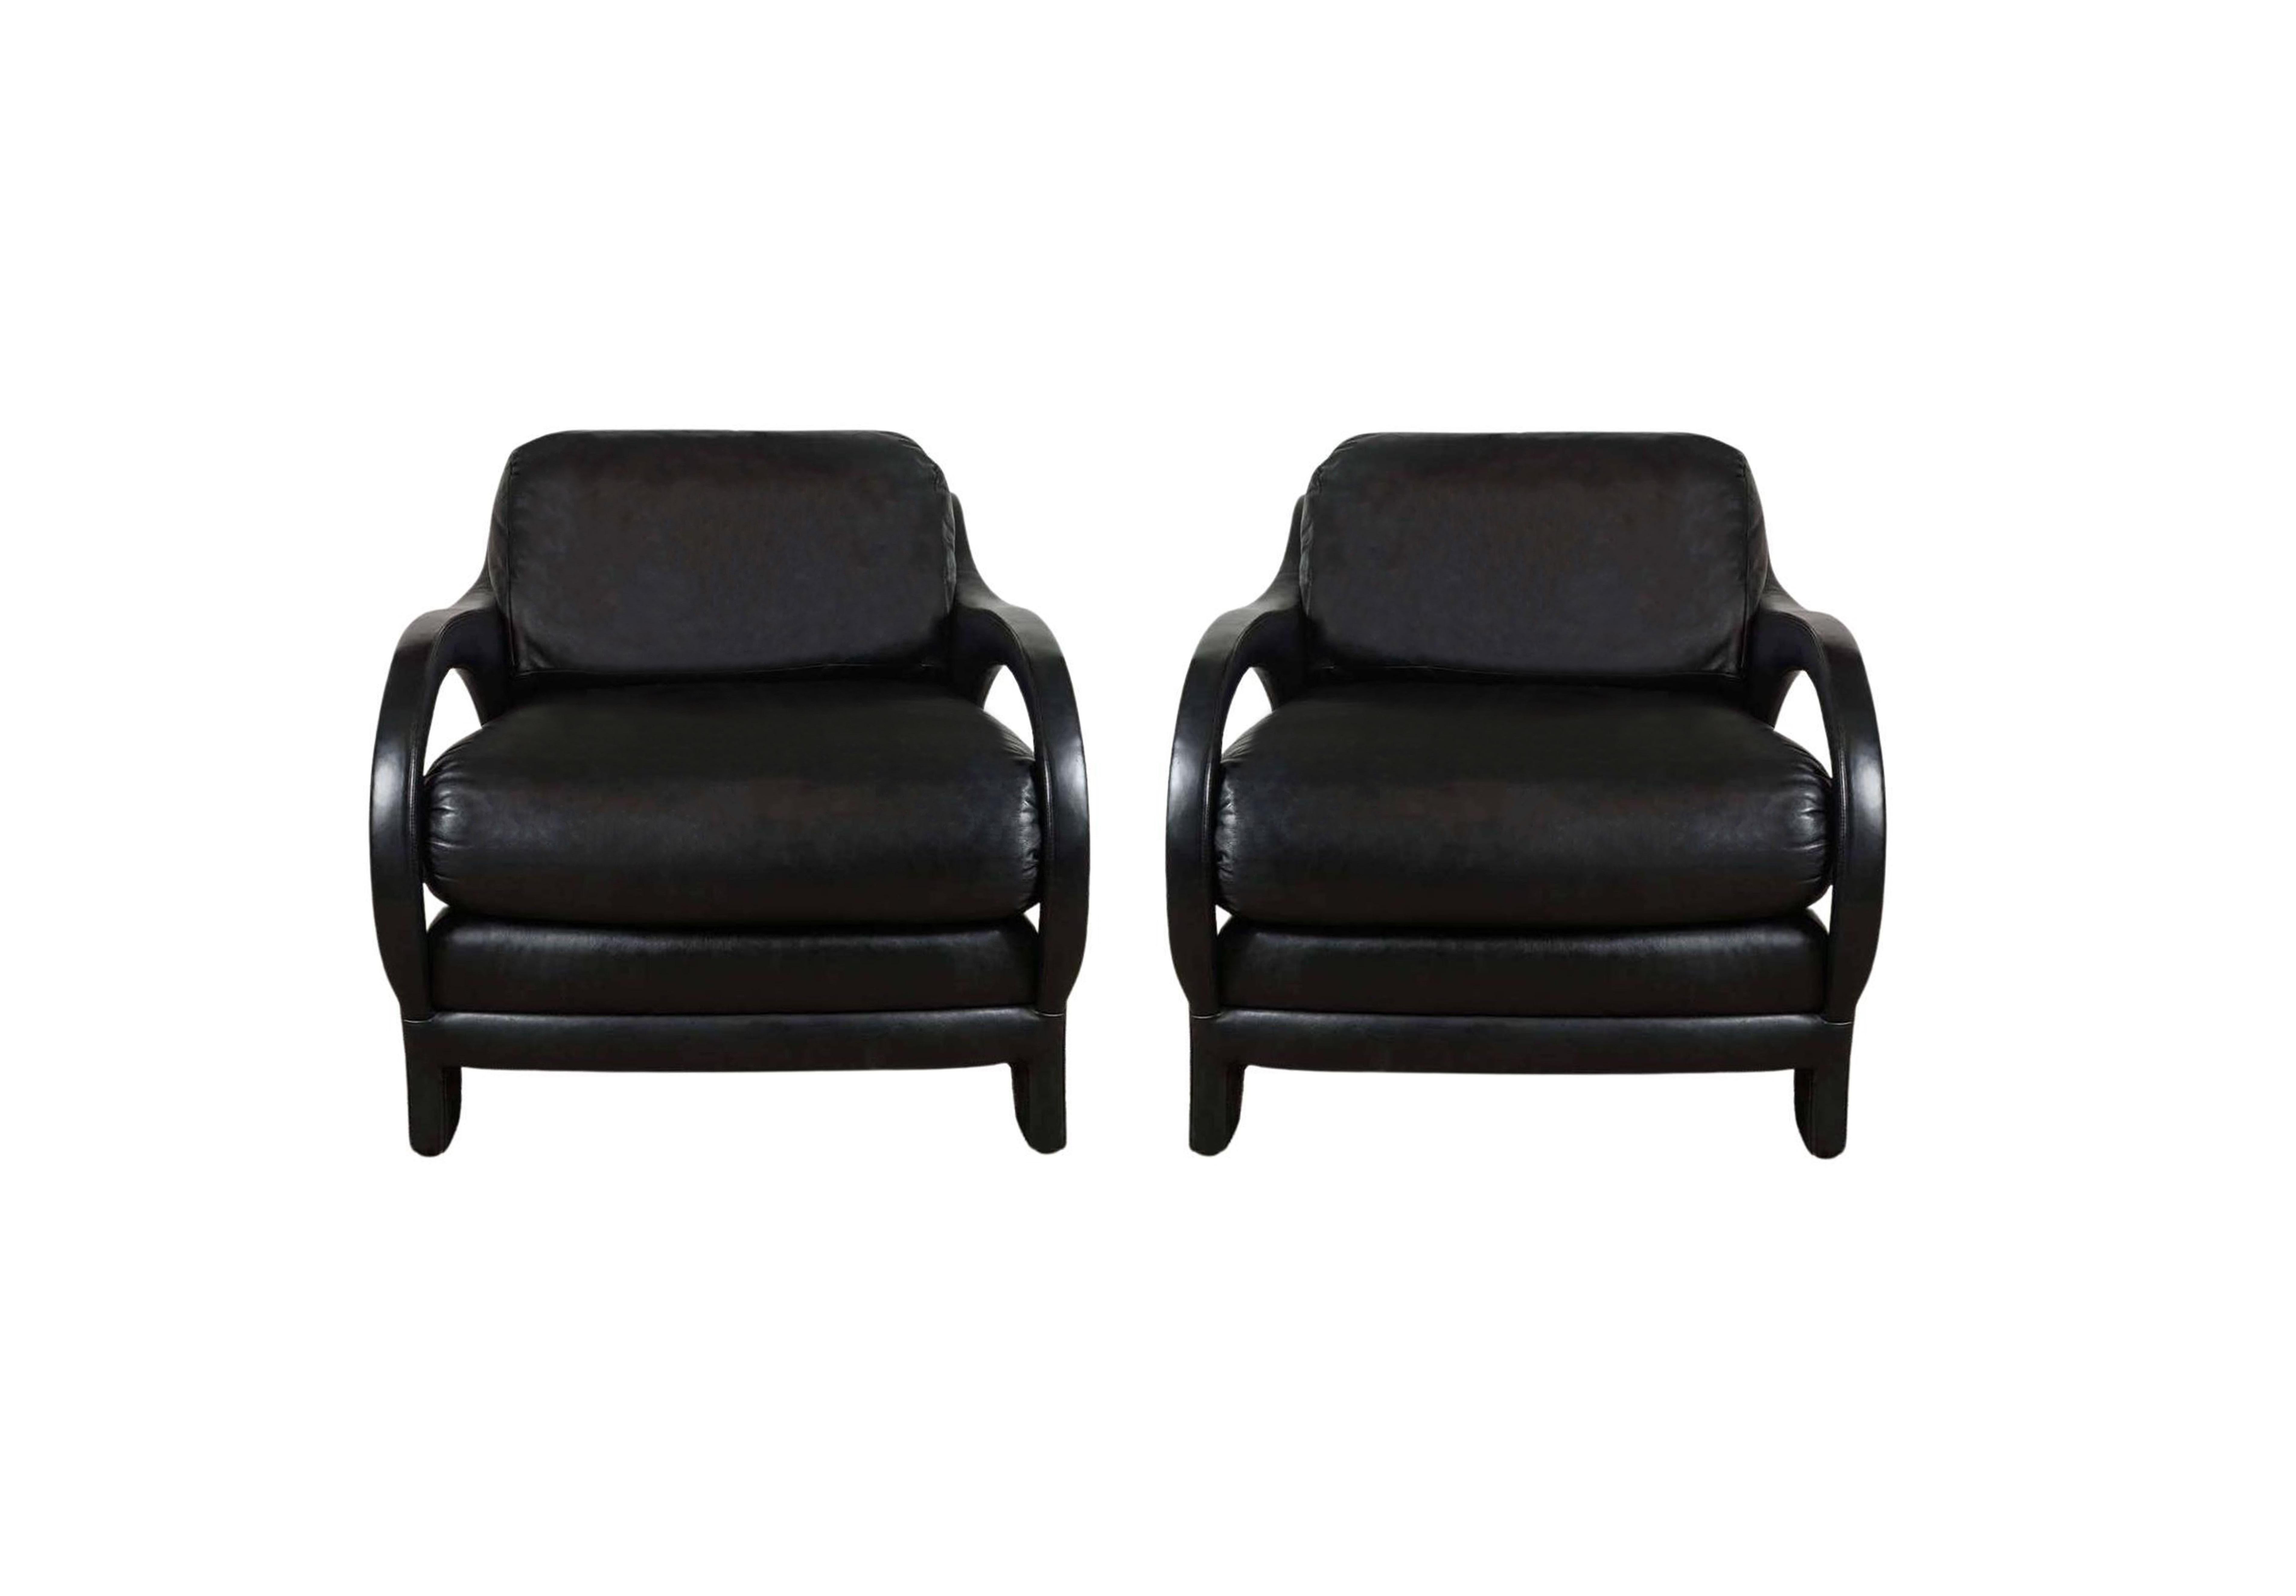 Pair of Black Leather Jay Spectre Tycoon Lounge Chairs In Excellent Condition For Sale In Dallas, TX